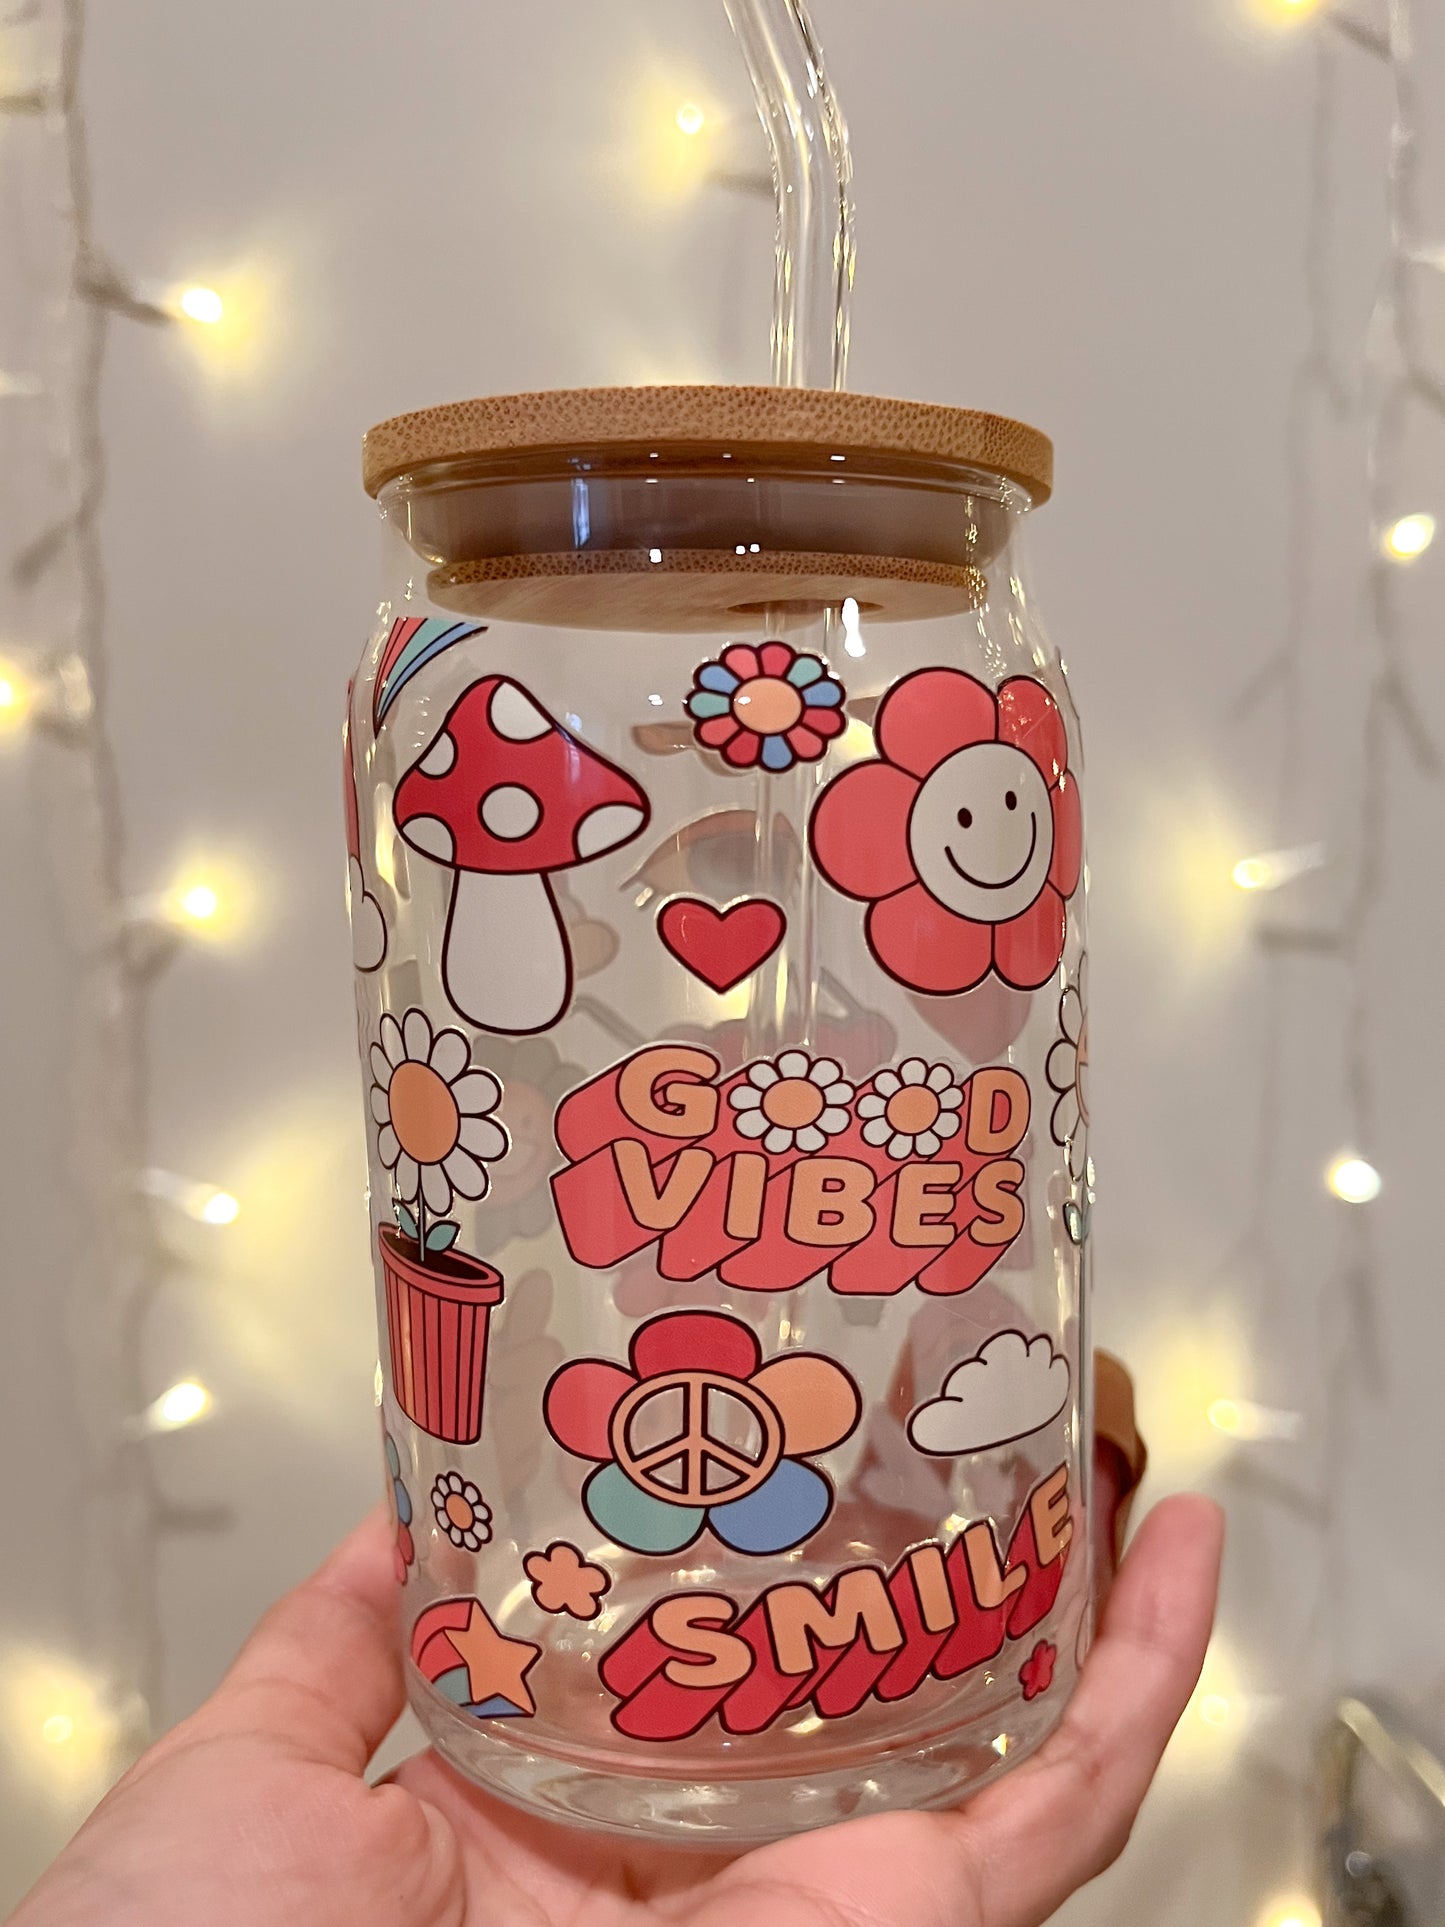 My Good Vibes cup